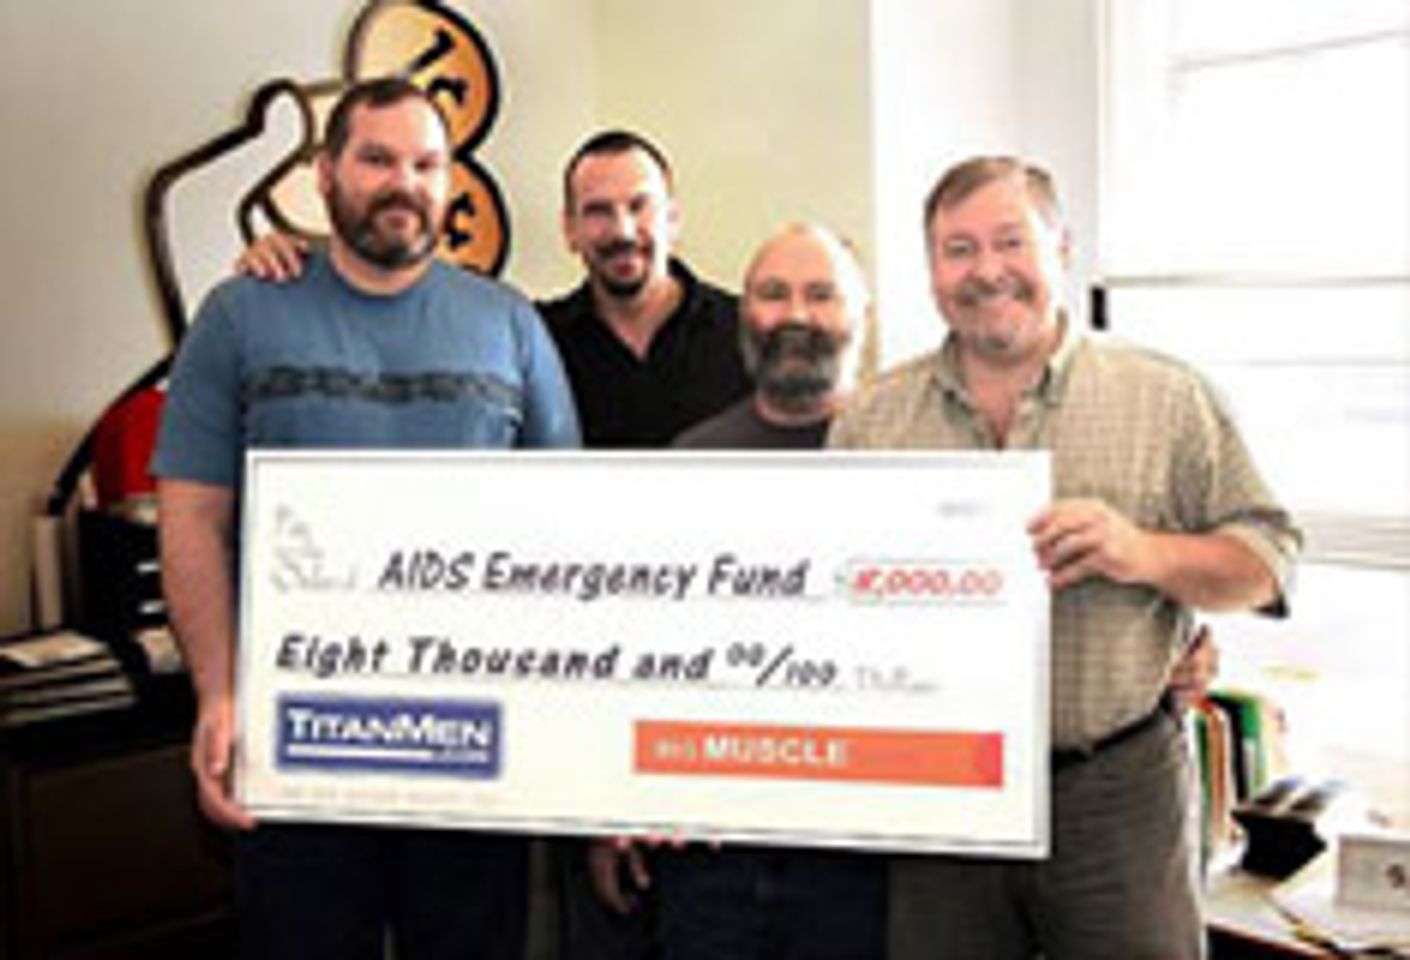 BigMuscle Launch Raises $8,000 for AIDS Emergency Fund